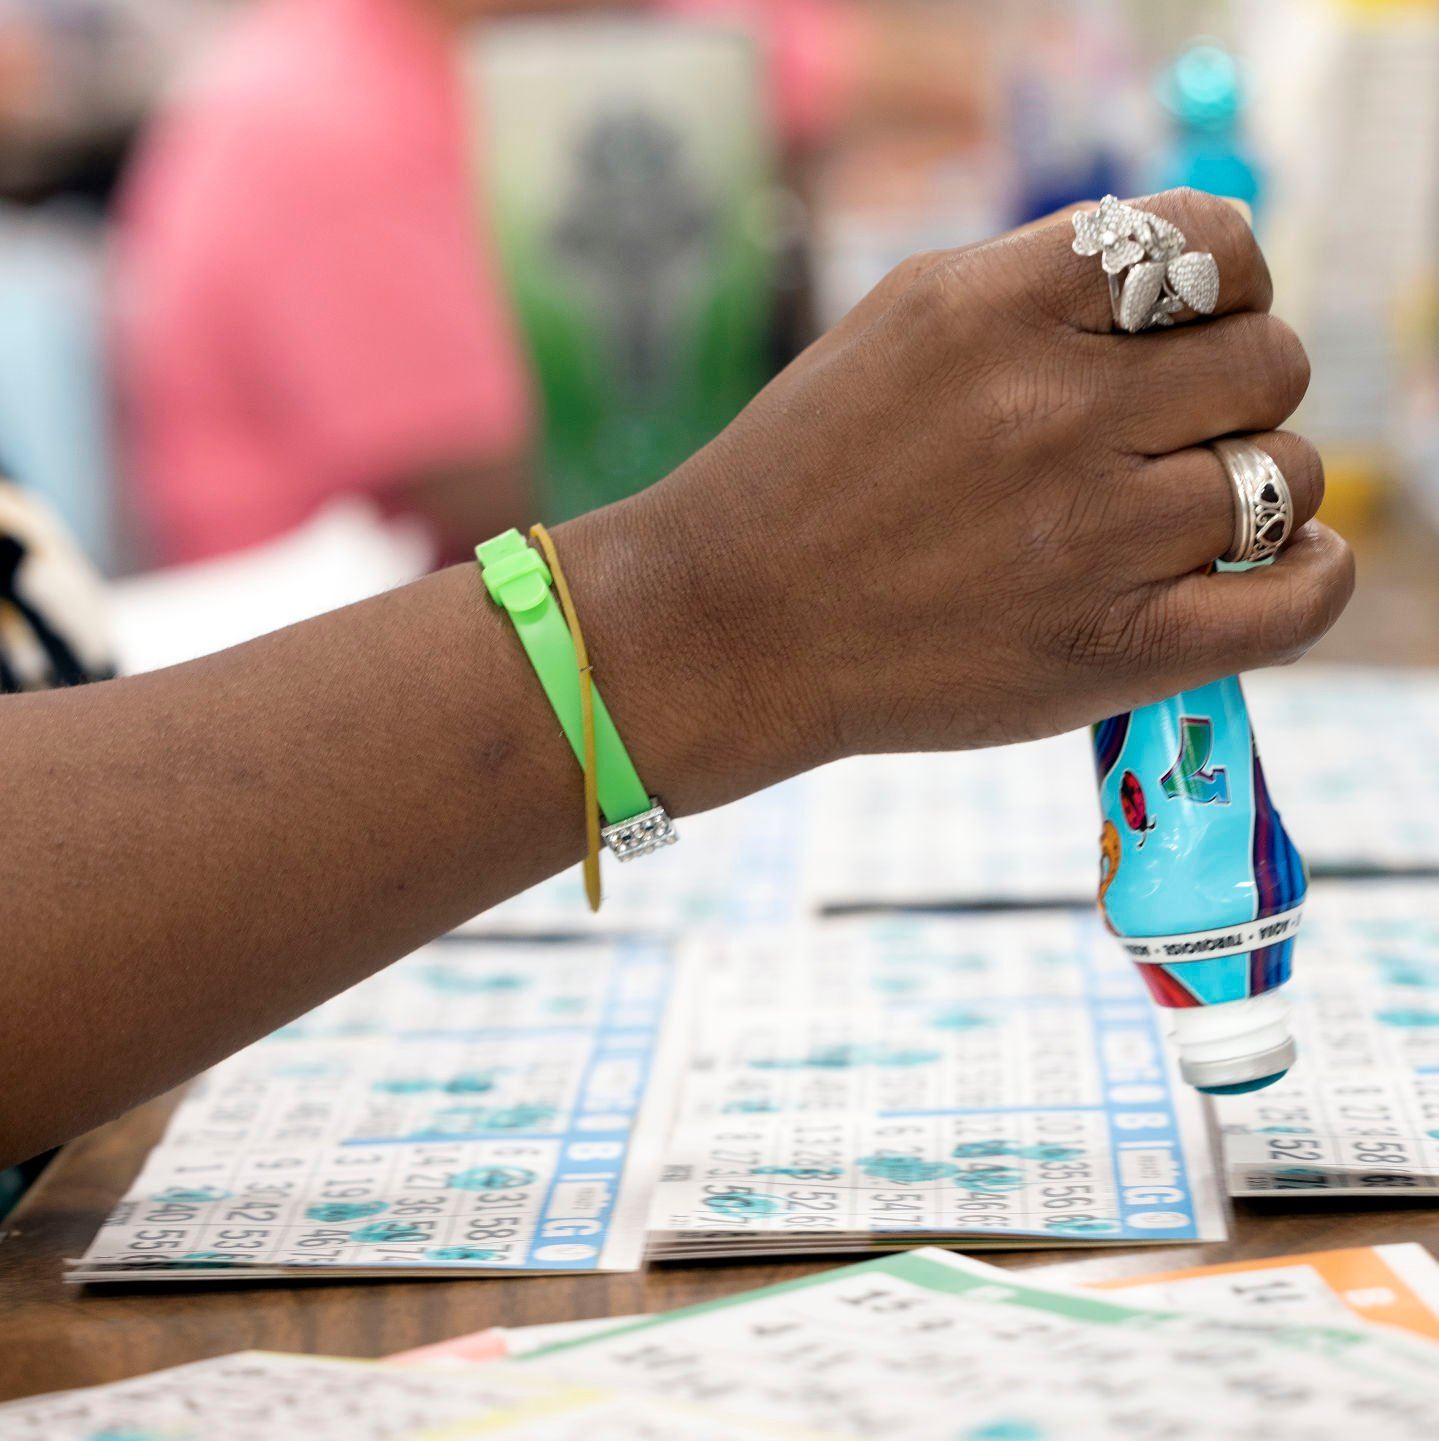 Bingo night at the Tri-State Independent Blind Society in Dubuque on Wednesday, July 3, 2022.    PHOTO CREDIT: Stephen Gassman